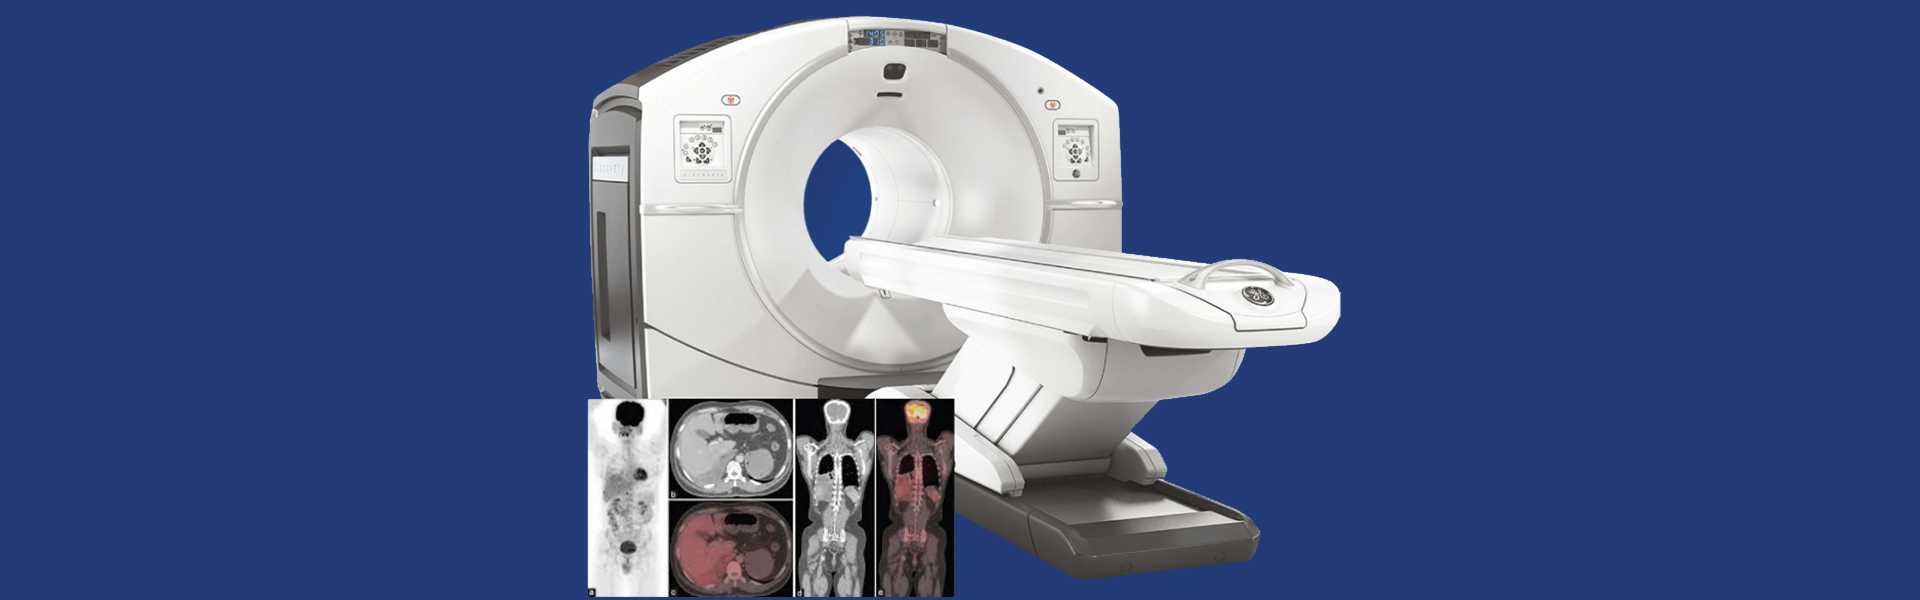 Whole Body-PET Scan in Bangalore